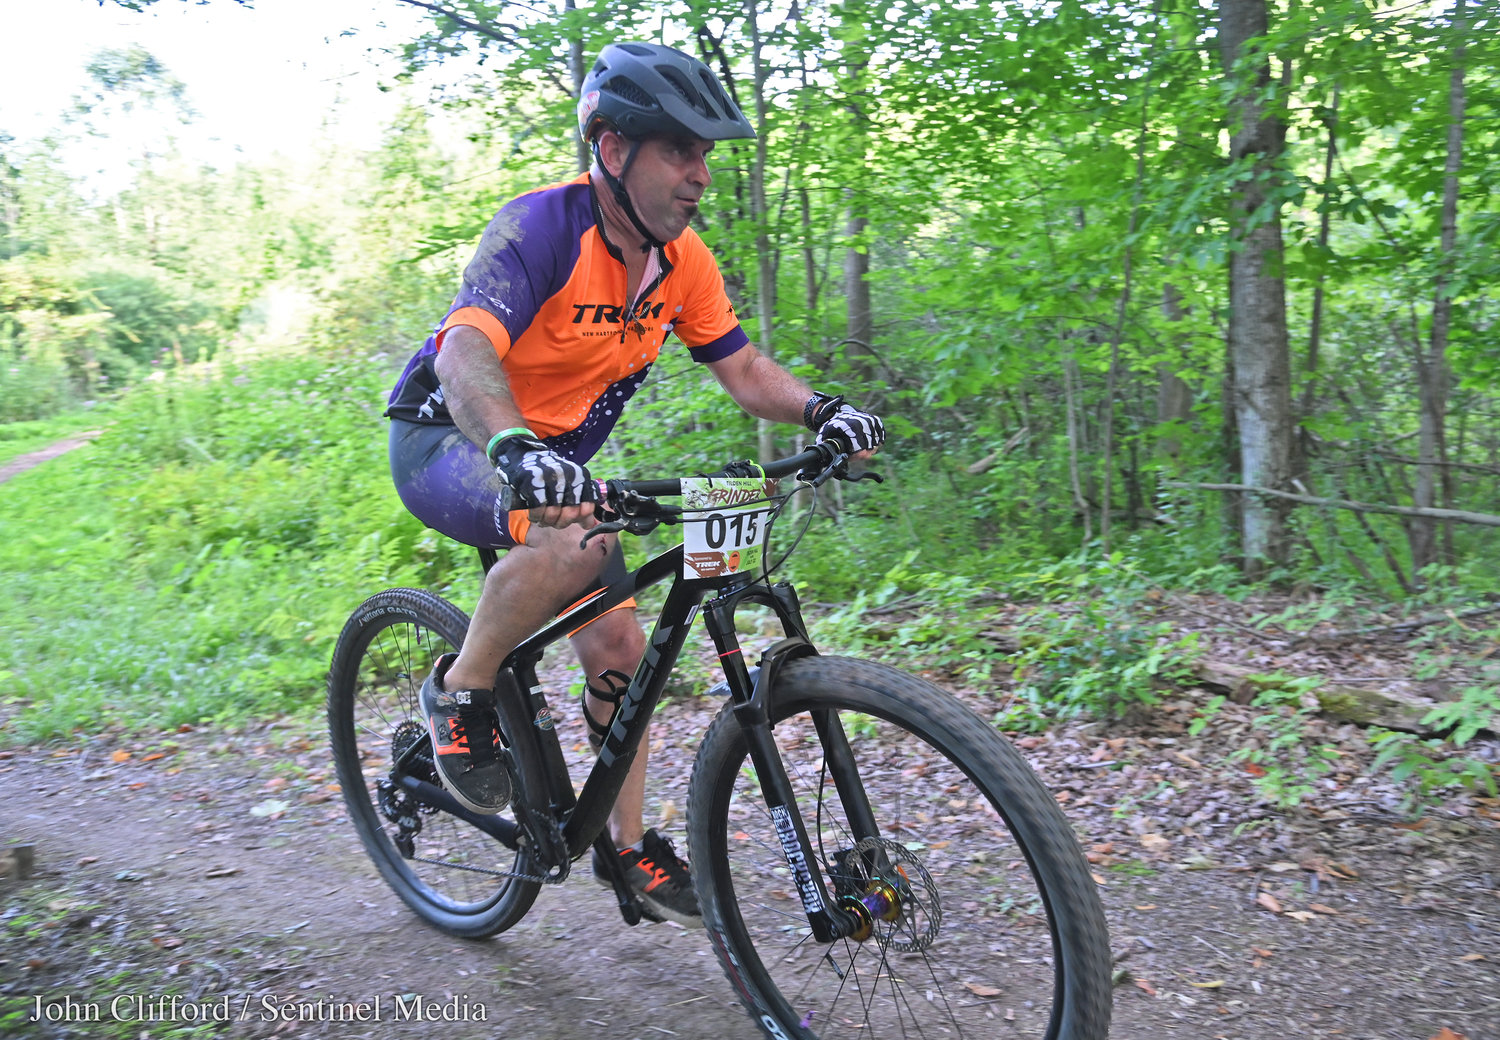 Jim Cheyne of Marcy (No. 015) heads up a hill during the half hour Tilden Hill Grinder series bike race in Vernon Wednesday evening. Cheyne finished second in the race.